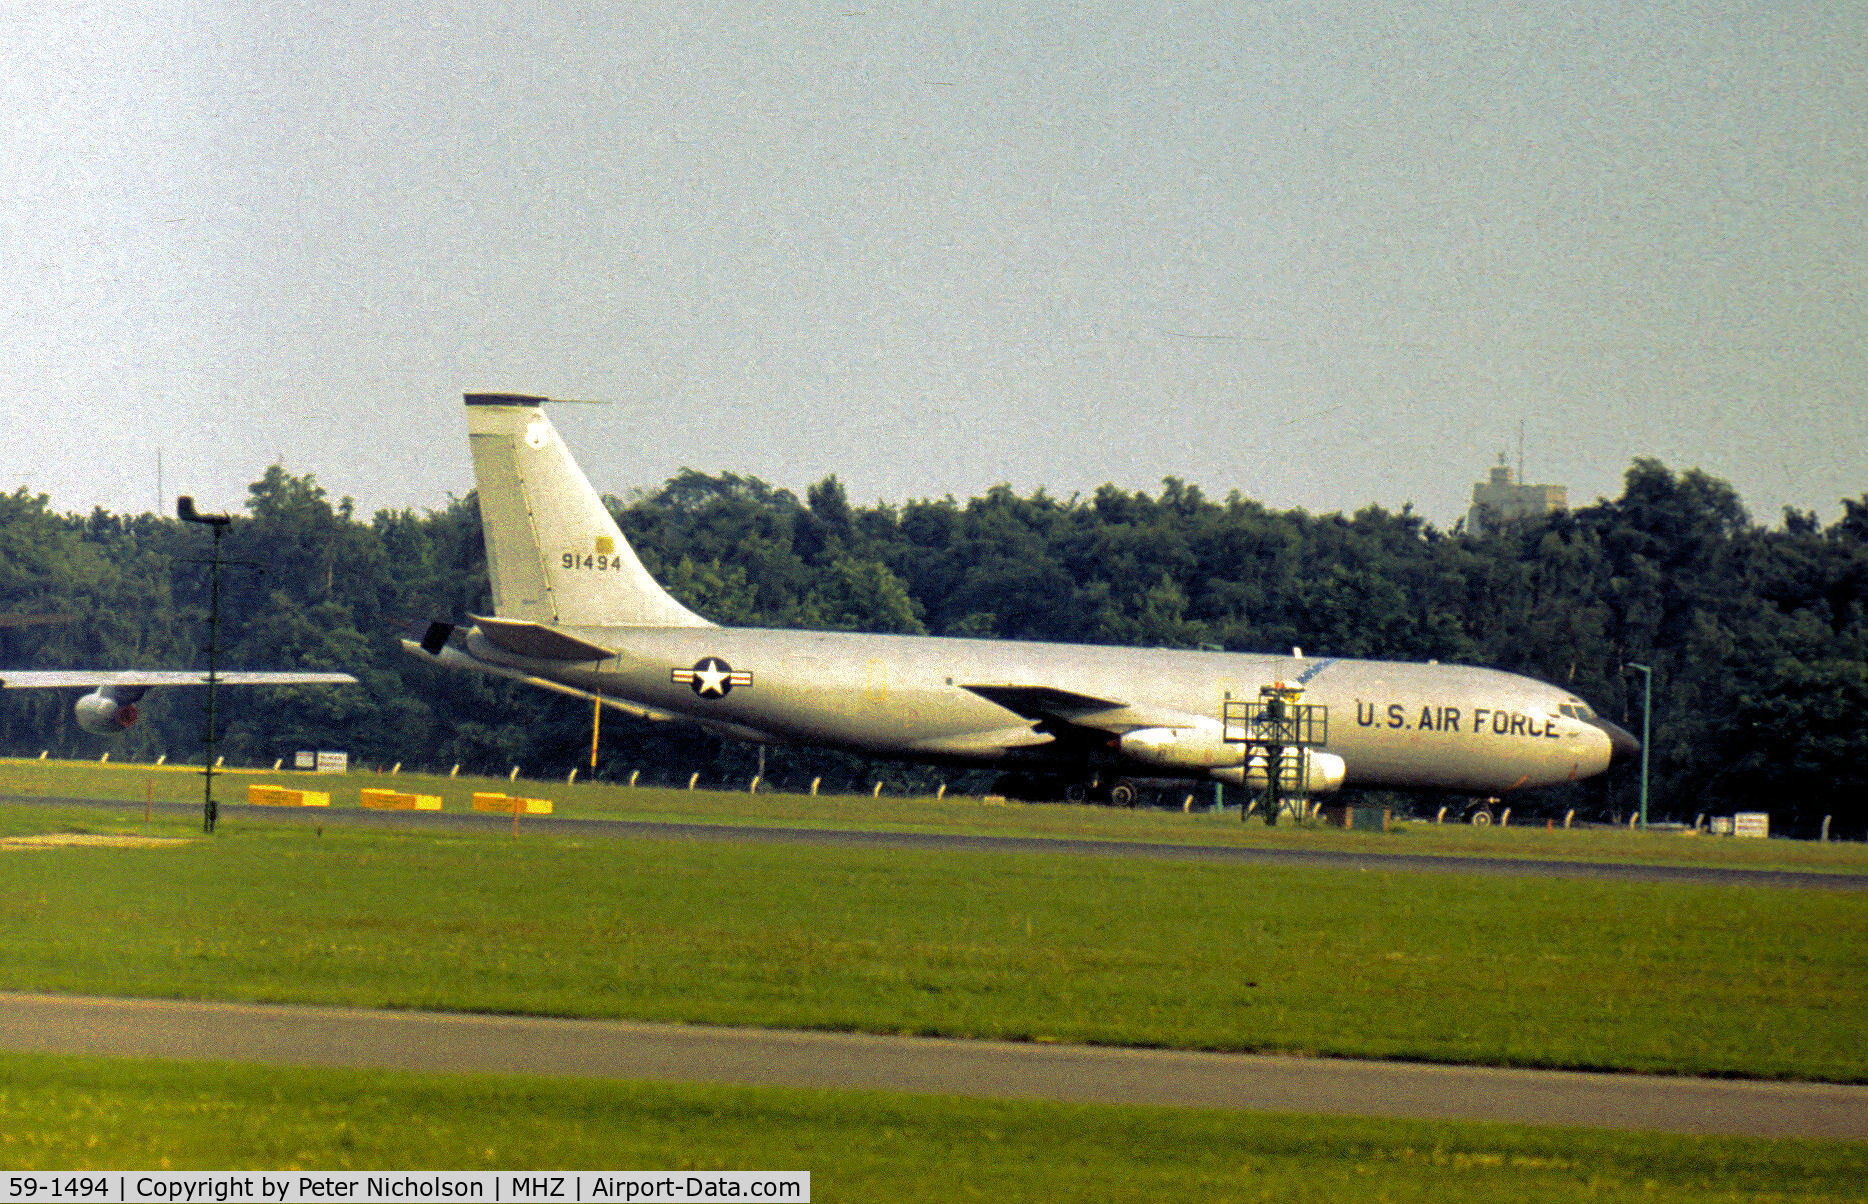 59-1494, 1959 Boeing KC-135A Stratotanker C/N 17982, KC-135A Stratotanker of 147th Air Refuelling Squadron Pennsylvania ANG as seen at RAF Mildenhall in the Summer of 1978.